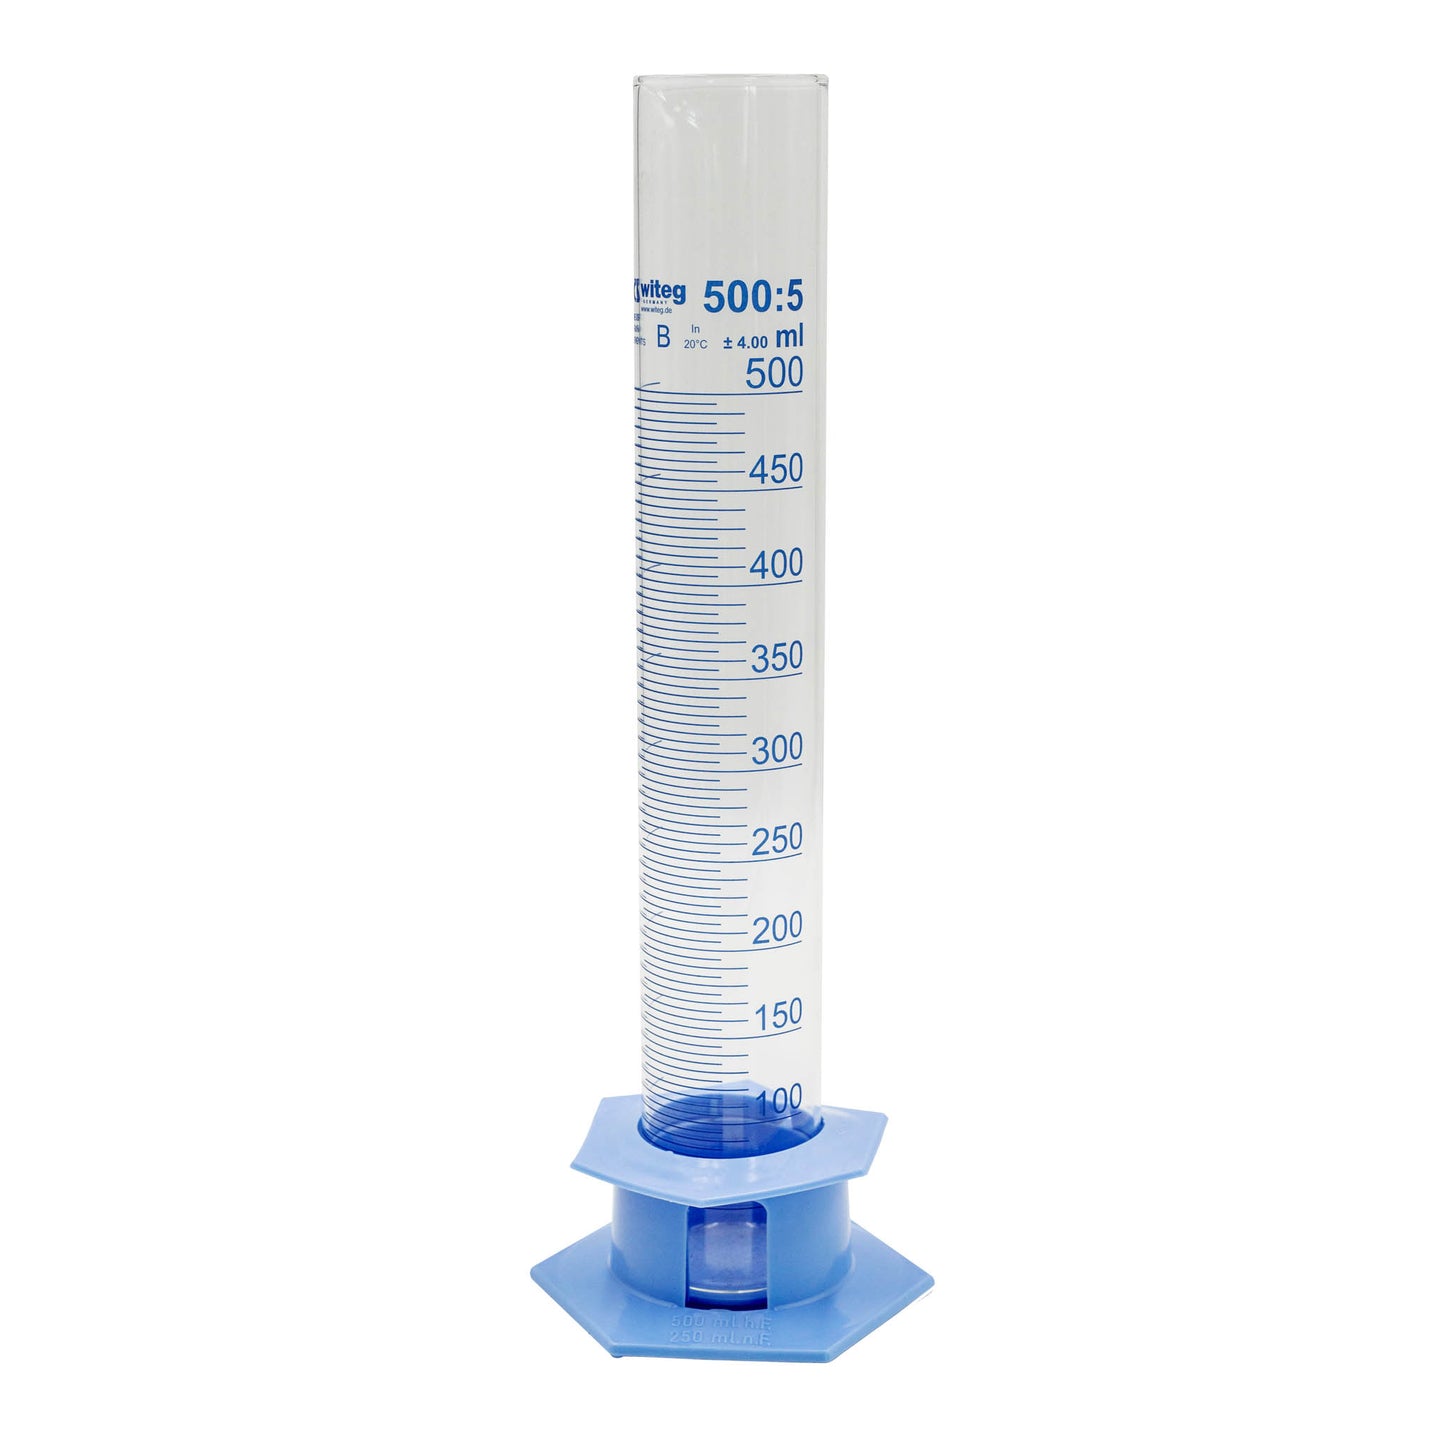 500ml glass measuring cylinder with plastic base and place holder. Measures in 5ml increments. 